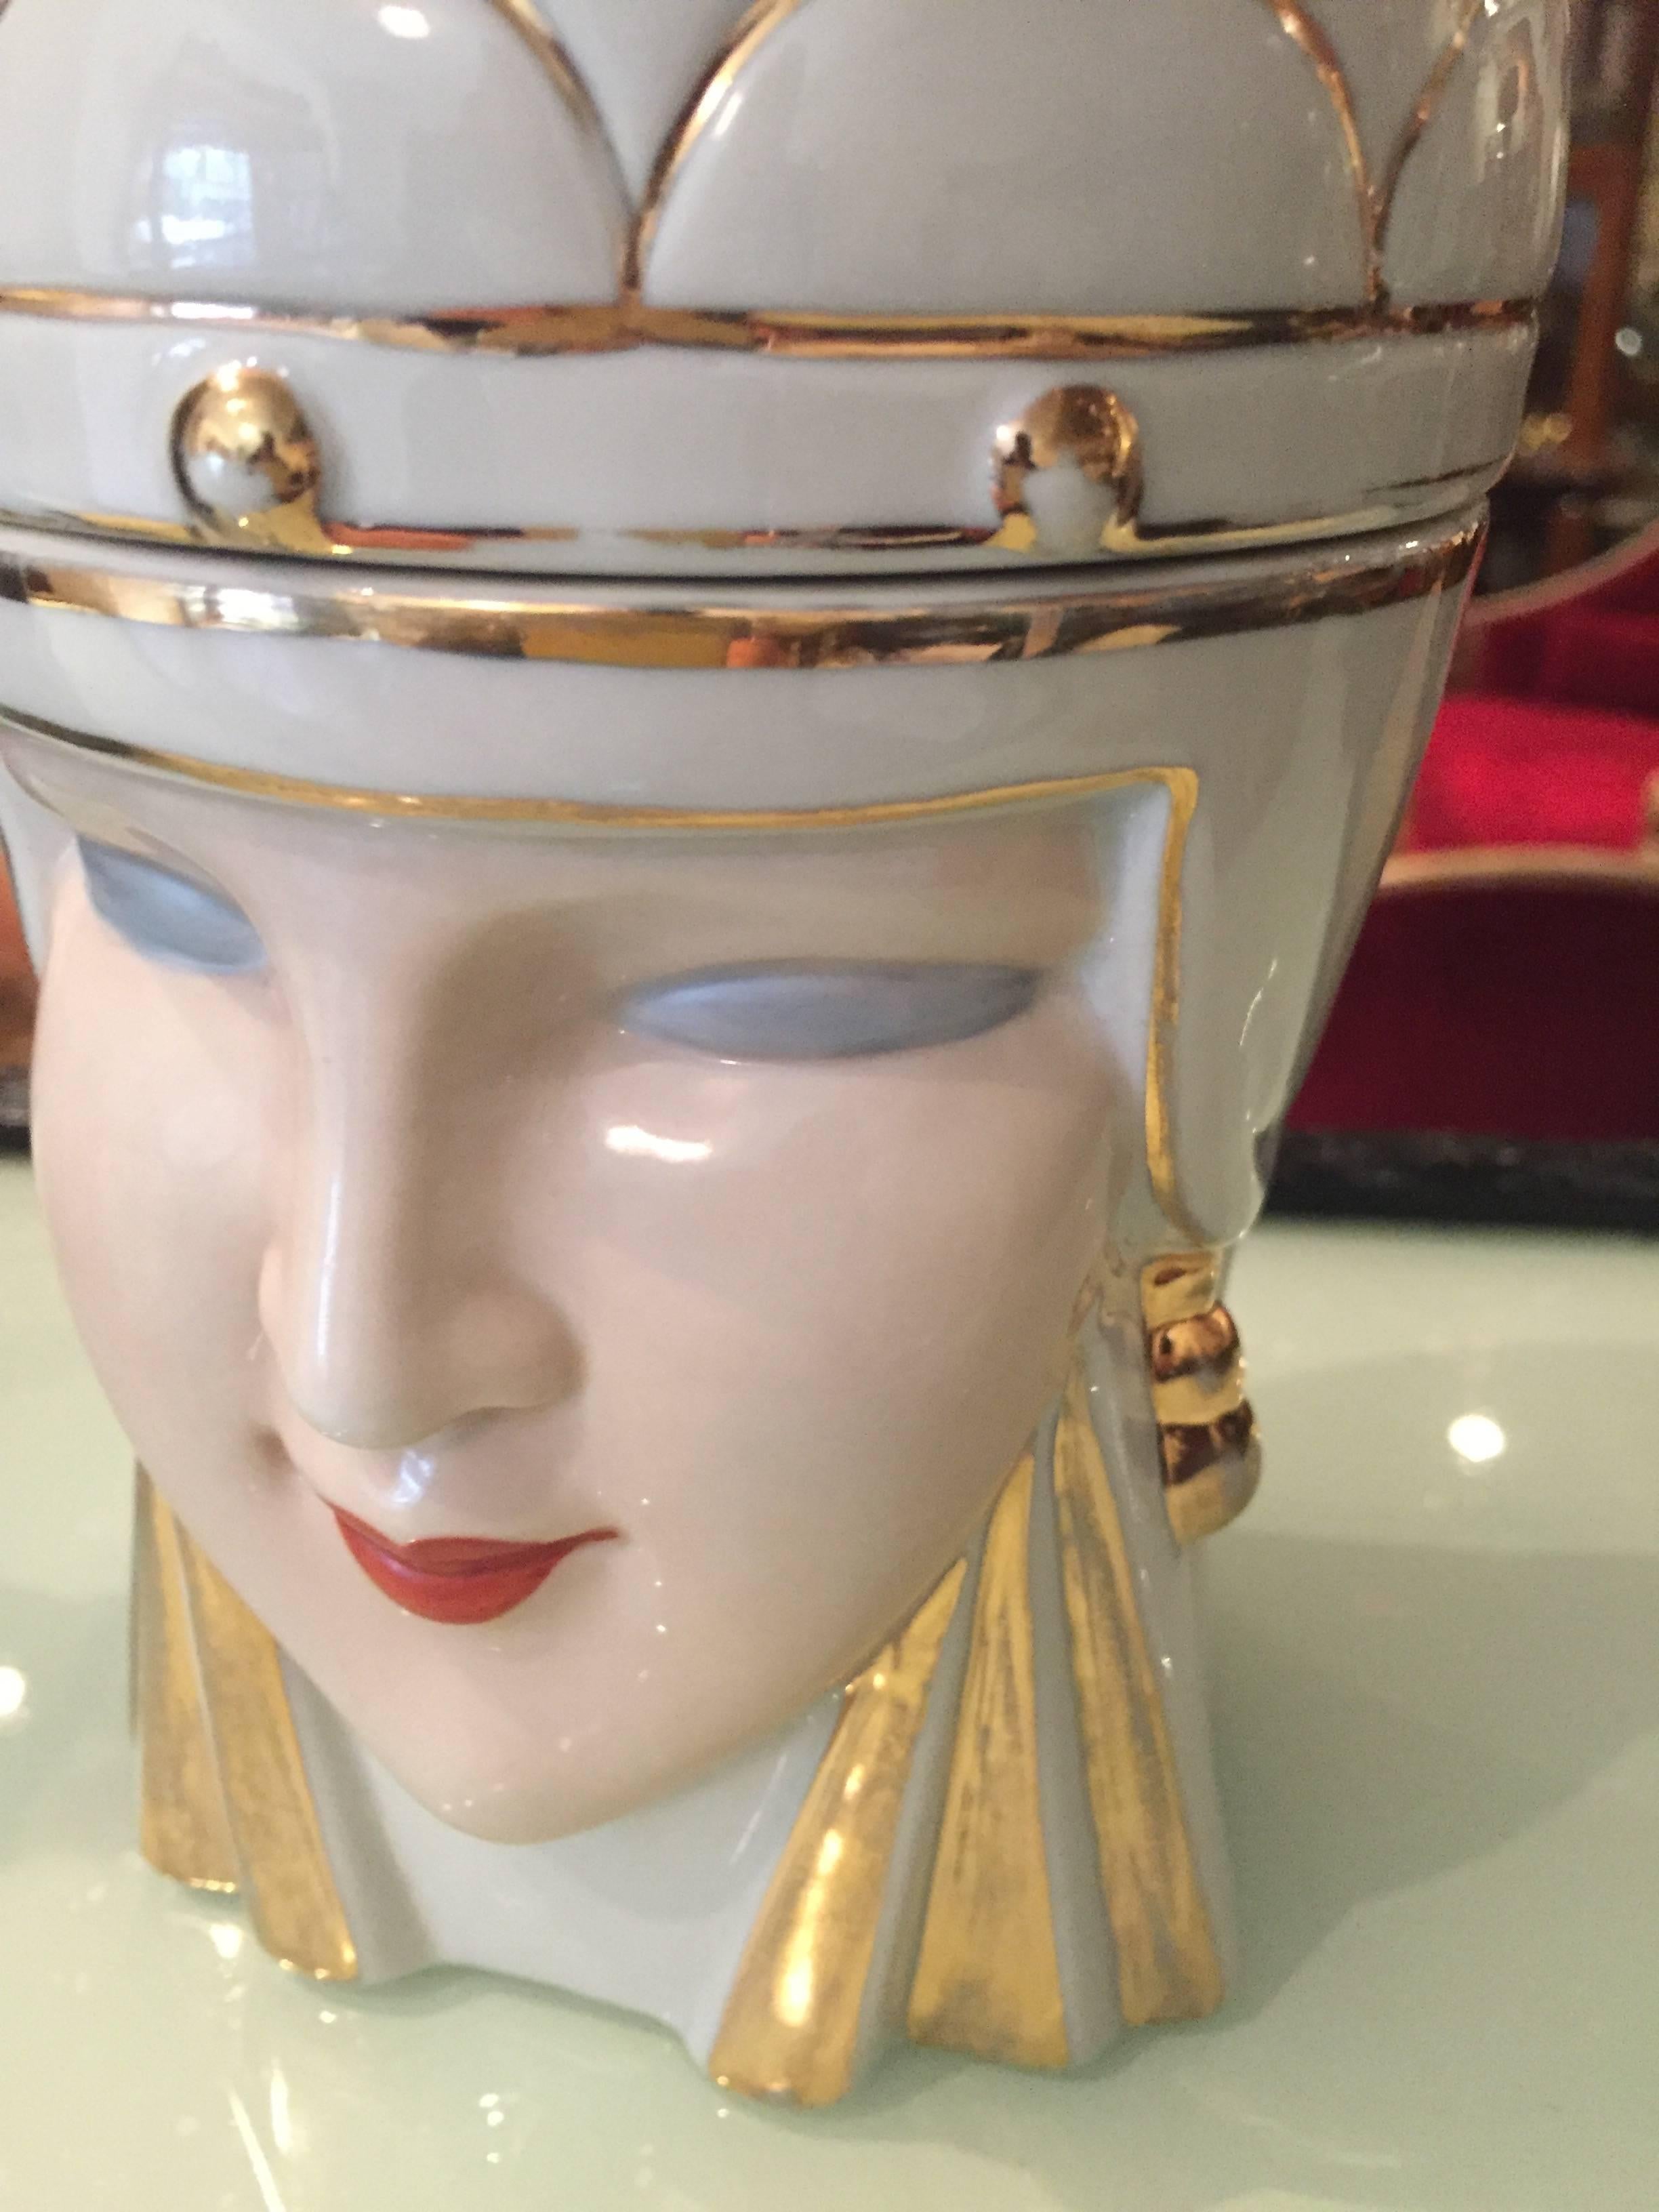 Original immaculate condition ROBJ decorative ceramics bon bon ceramic from the period of 1925-1930. Woman with crown and gold lines, important Egyptian influence in her head dress and treatment. This figure is beautifully rendered with two parts,